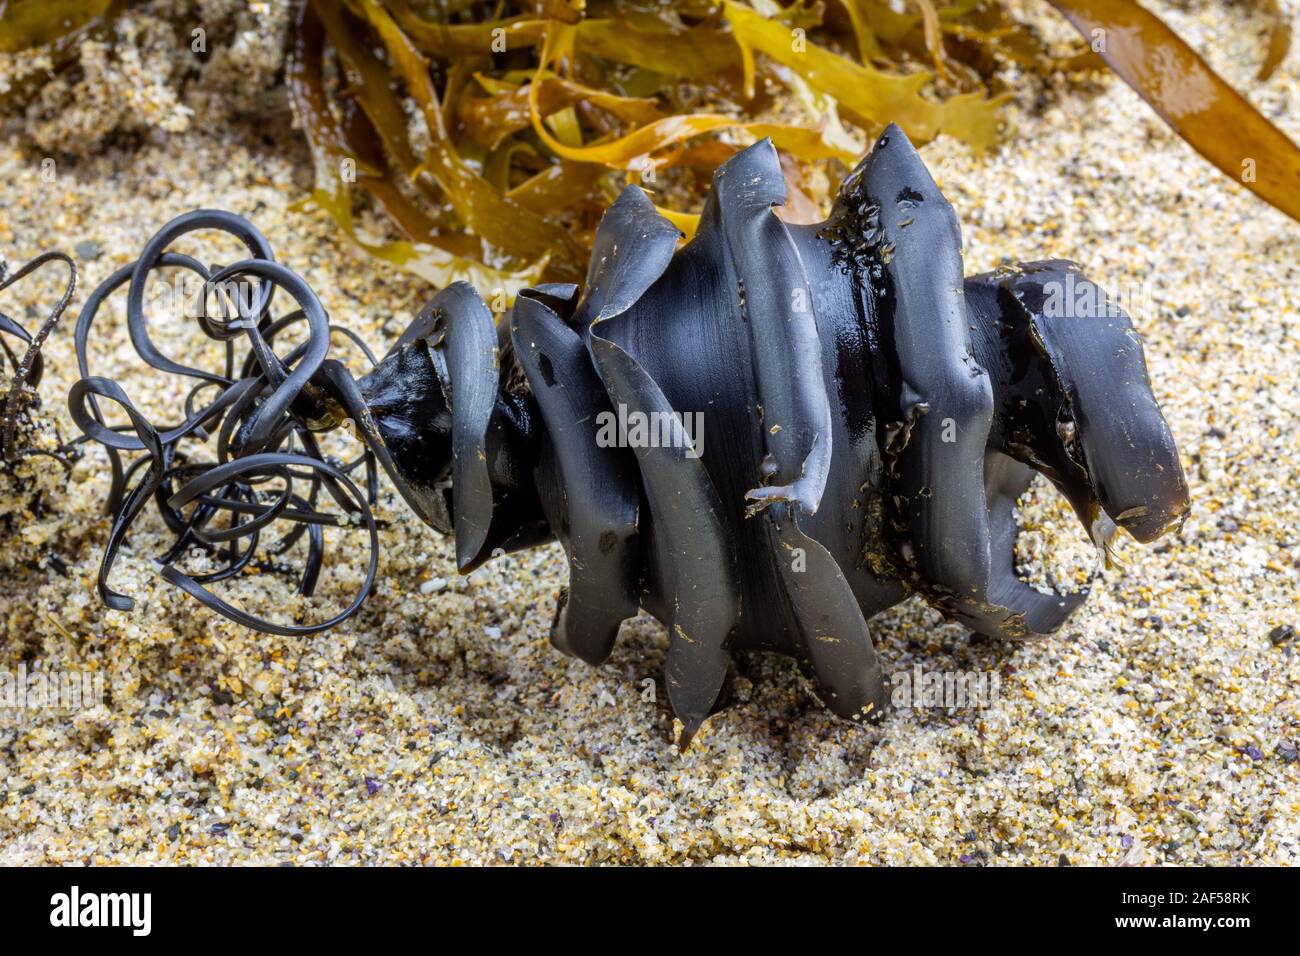 Close up of spiral shark egg case from the shark family Heterodontidae  washed up attached to seaweed found on beach. Port Jackson Shark,  Heterodontus Stock Photo - Alamy